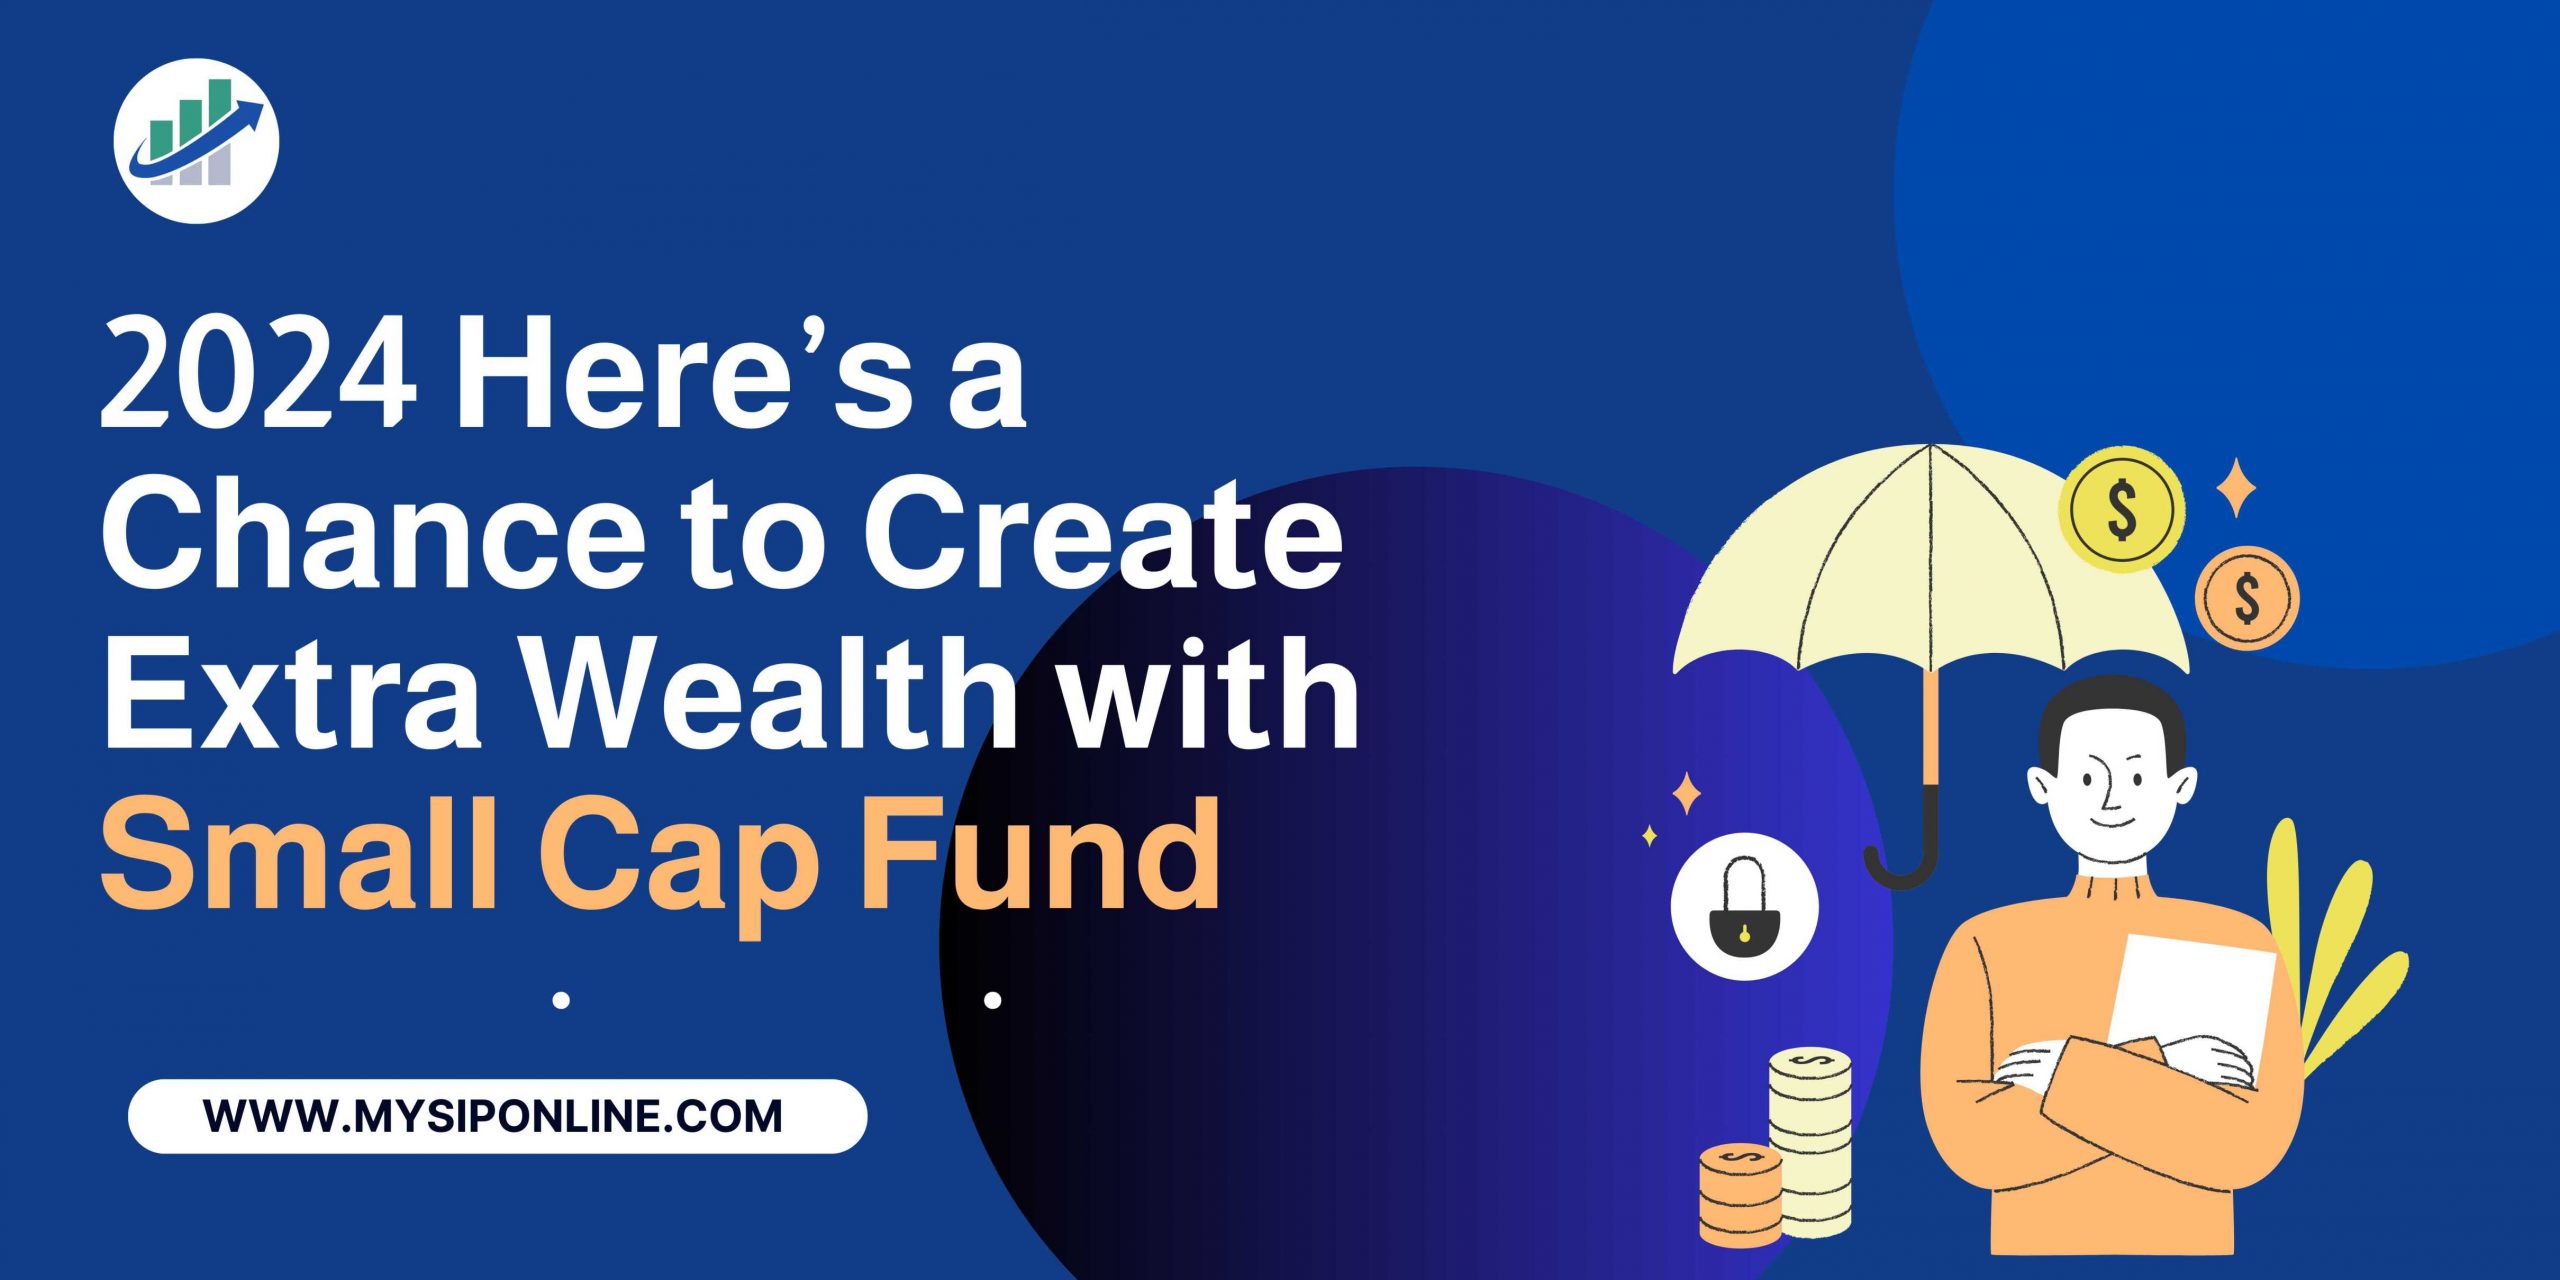 2024 Here’s a Chance to Create Extra Wealth with Small Cap Fund